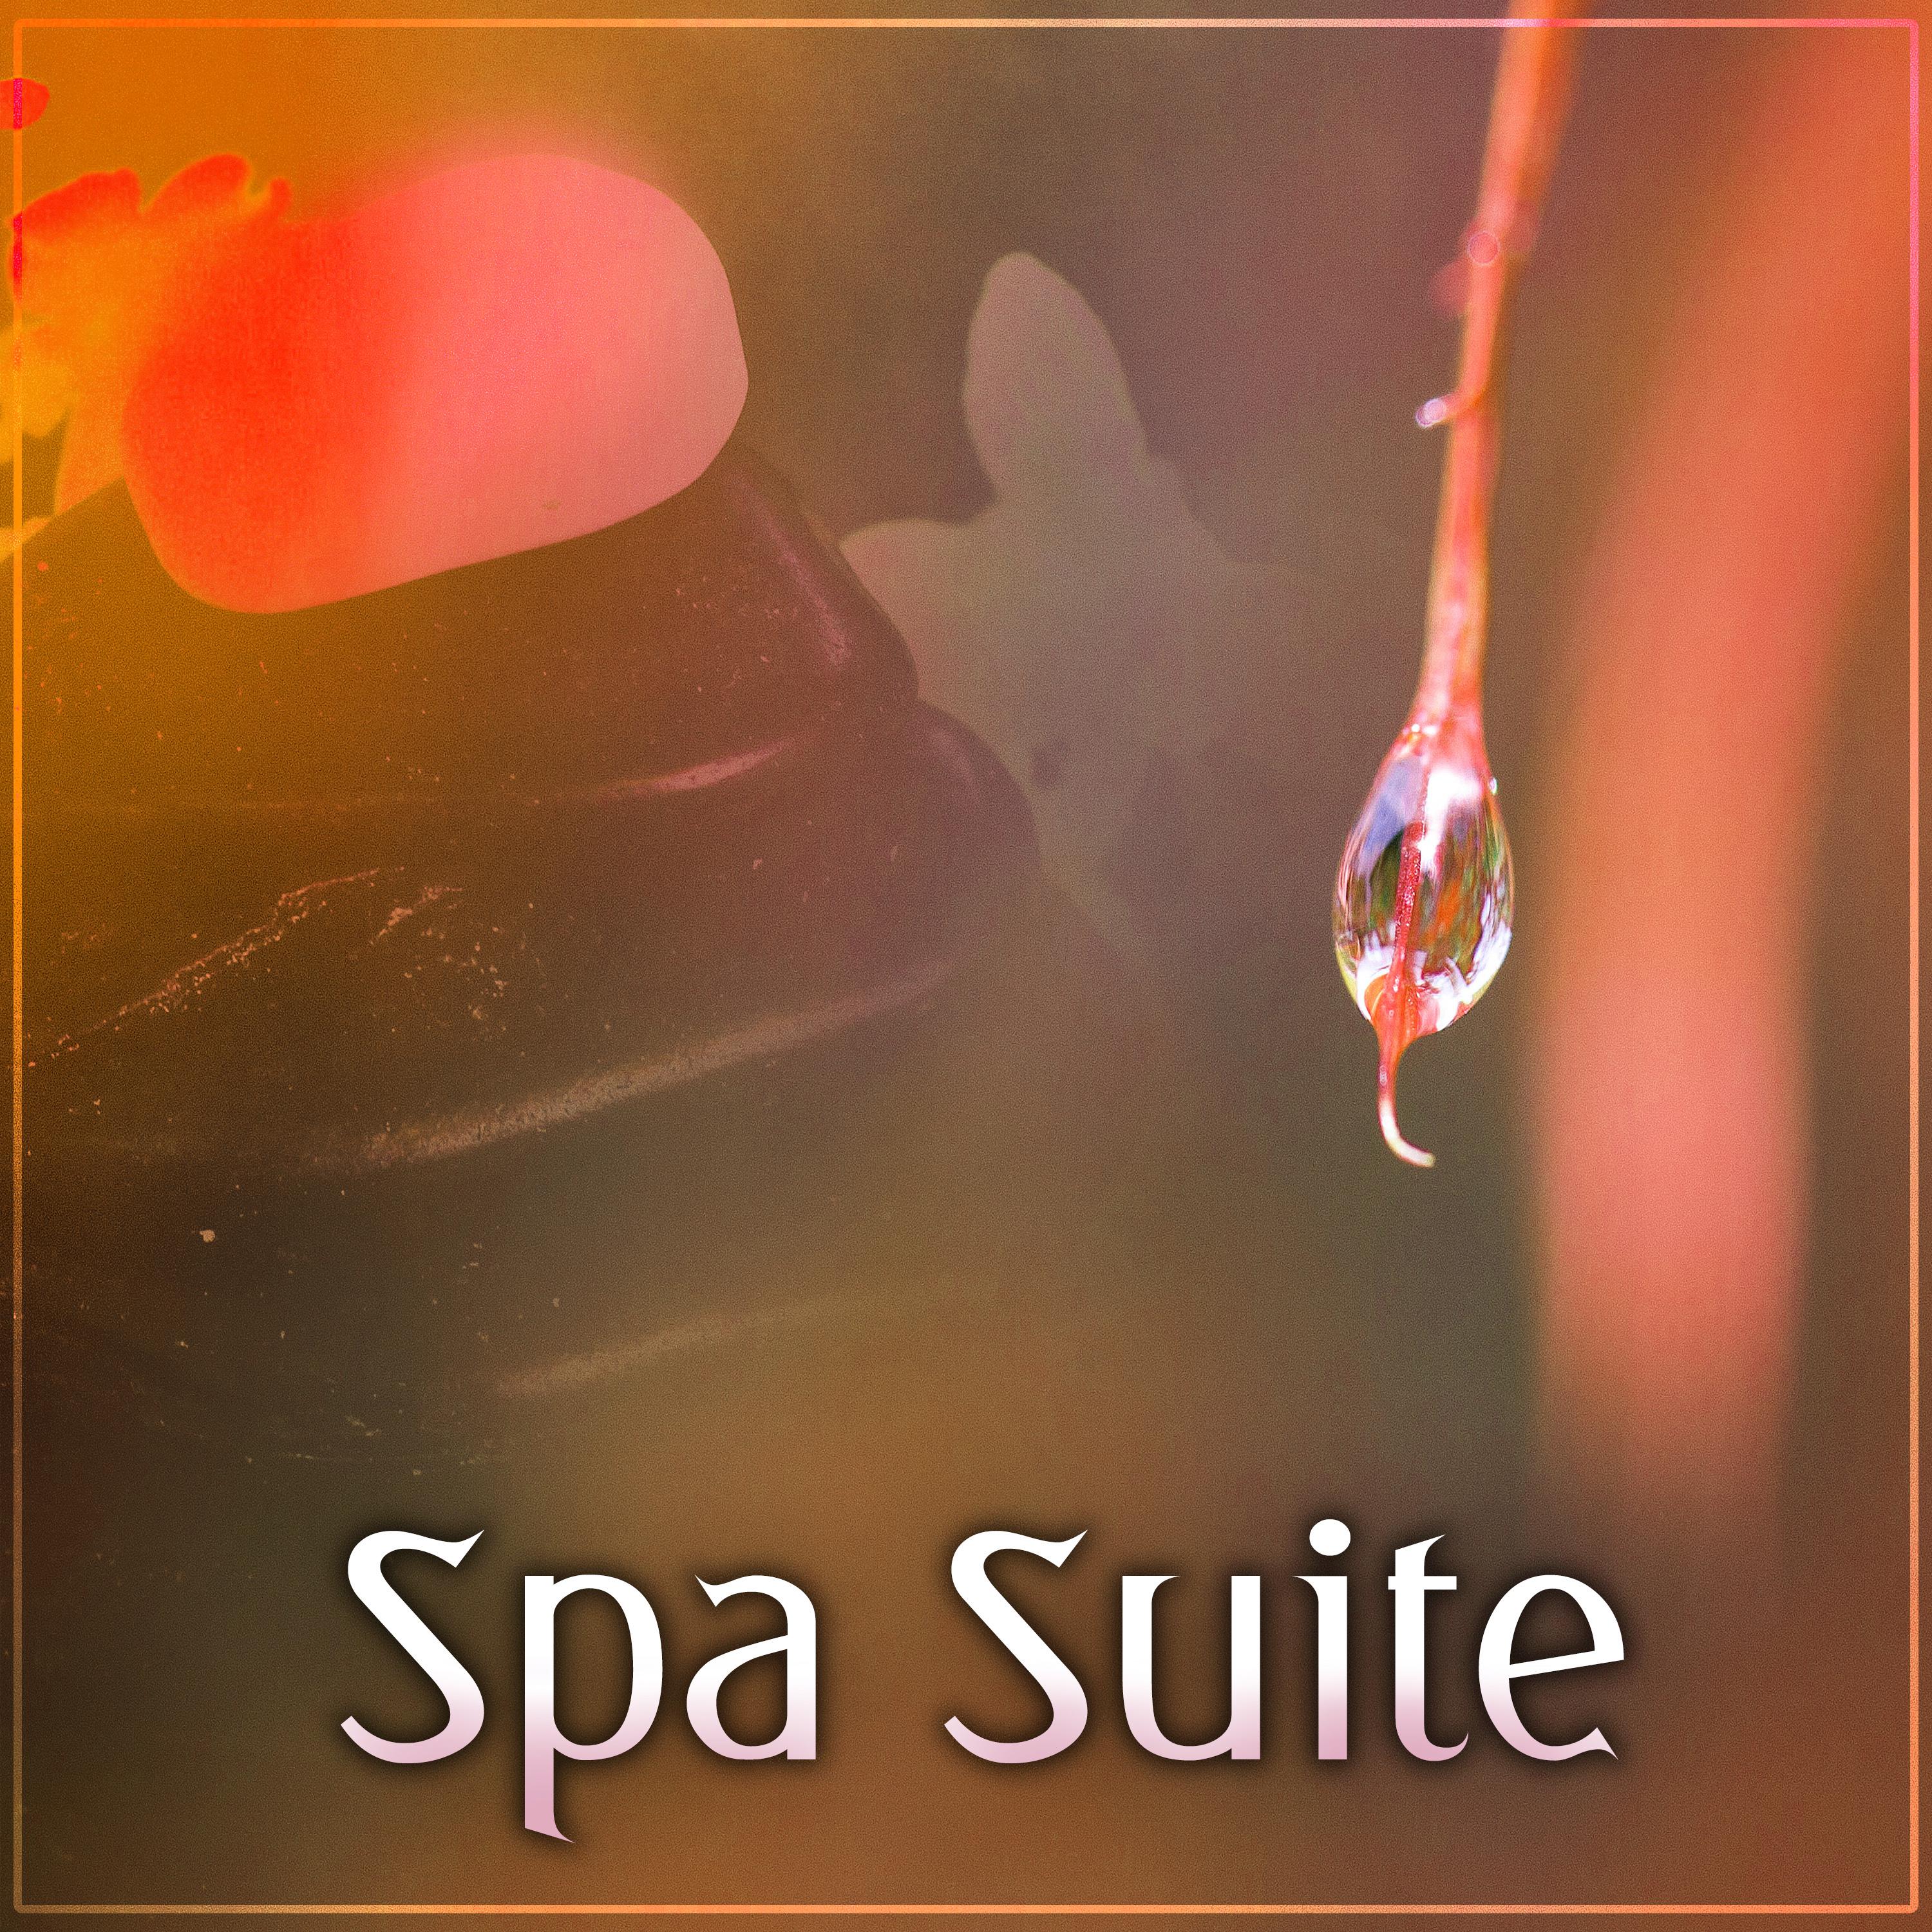 Spa Suite – Deep Massage, Nature Sounds for Spa Relaxation, Soft Music, Deep Calm, Purity